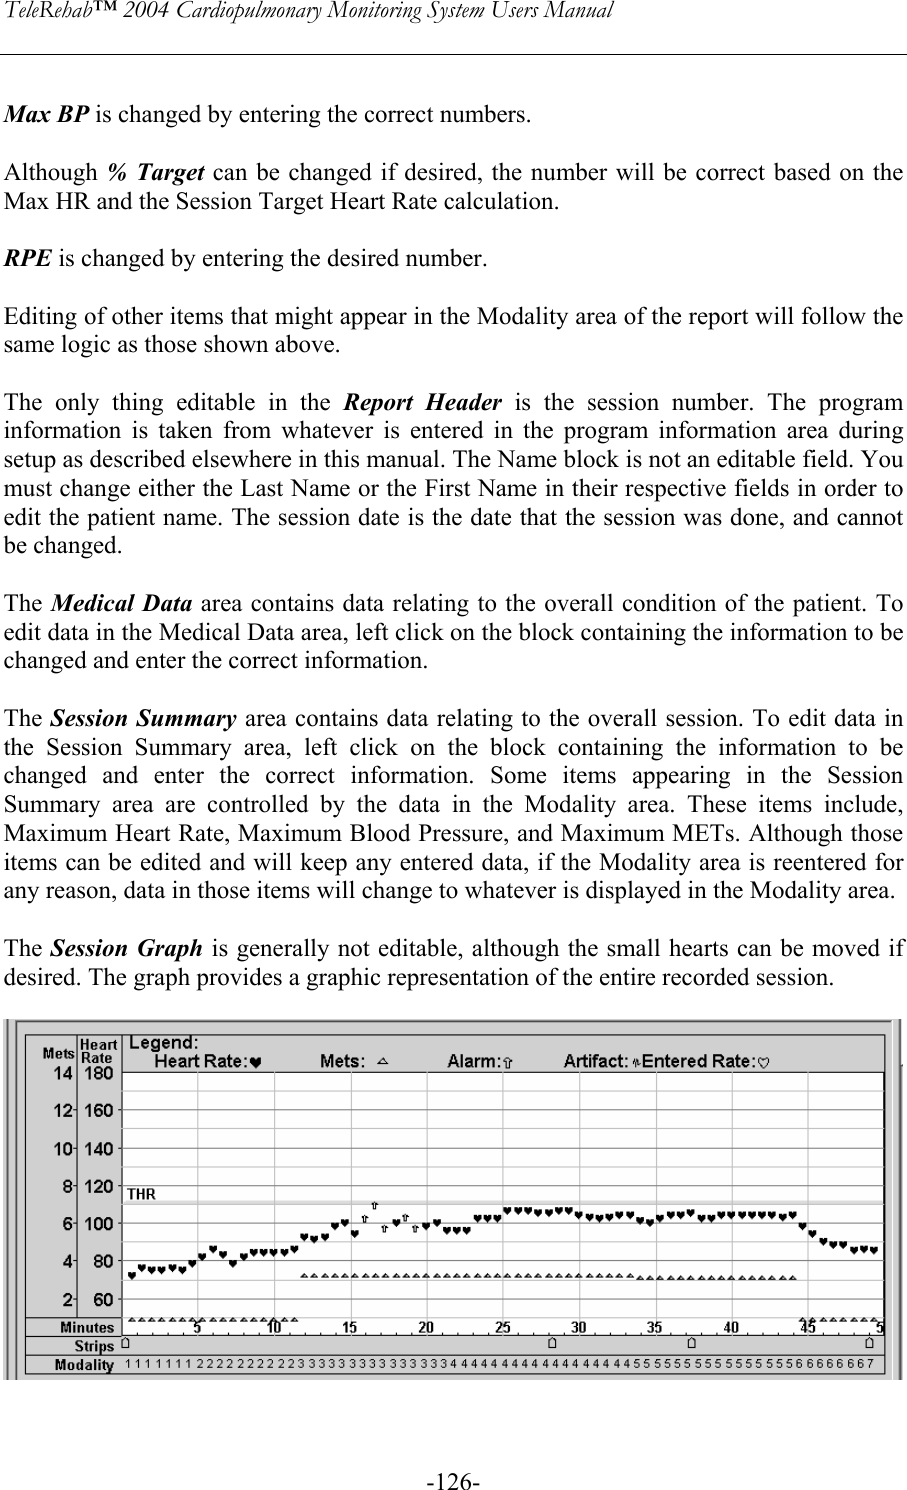 TeleRehab™ 2004 Cardiopulmonary Monitoring System Users Manual    -126- Max BP is changed by entering the correct numbers.  Although % Target can be changed if desired, the number will be correct based on the Max HR and the Session Target Heart Rate calculation.  RPE is changed by entering the desired number.  Editing of other items that might appear in the Modality area of the report will follow the same logic as those shown above.  The only thing editable in the Report Header is the session number. The program information is taken from whatever is entered in the program information area during setup as described elsewhere in this manual. The Name block is not an editable field. You must change either the Last Name or the First Name in their respective fields in order to edit the patient name. The session date is the date that the session was done, and cannot be changed.  The Medical Data area contains data relating to the overall condition of the patient. To edit data in the Medical Data area, left click on the block containing the information to be changed and enter the correct information.  The Session Summary area contains data relating to the overall session. To edit data in the Session Summary area, left click on the block containing the information to be changed and enter the correct information. Some items appearing in the Session Summary area are controlled by the data in the Modality area. These items include, Maximum Heart Rate, Maximum Blood Pressure, and Maximum METs. Although those items can be edited and will keep any entered data, if the Modality area is reentered for any reason, data in those items will change to whatever is displayed in the Modality area.     The Session Graph is generally not editable, although the small hearts can be moved if desired. The graph provides a graphic representation of the entire recorded session.     